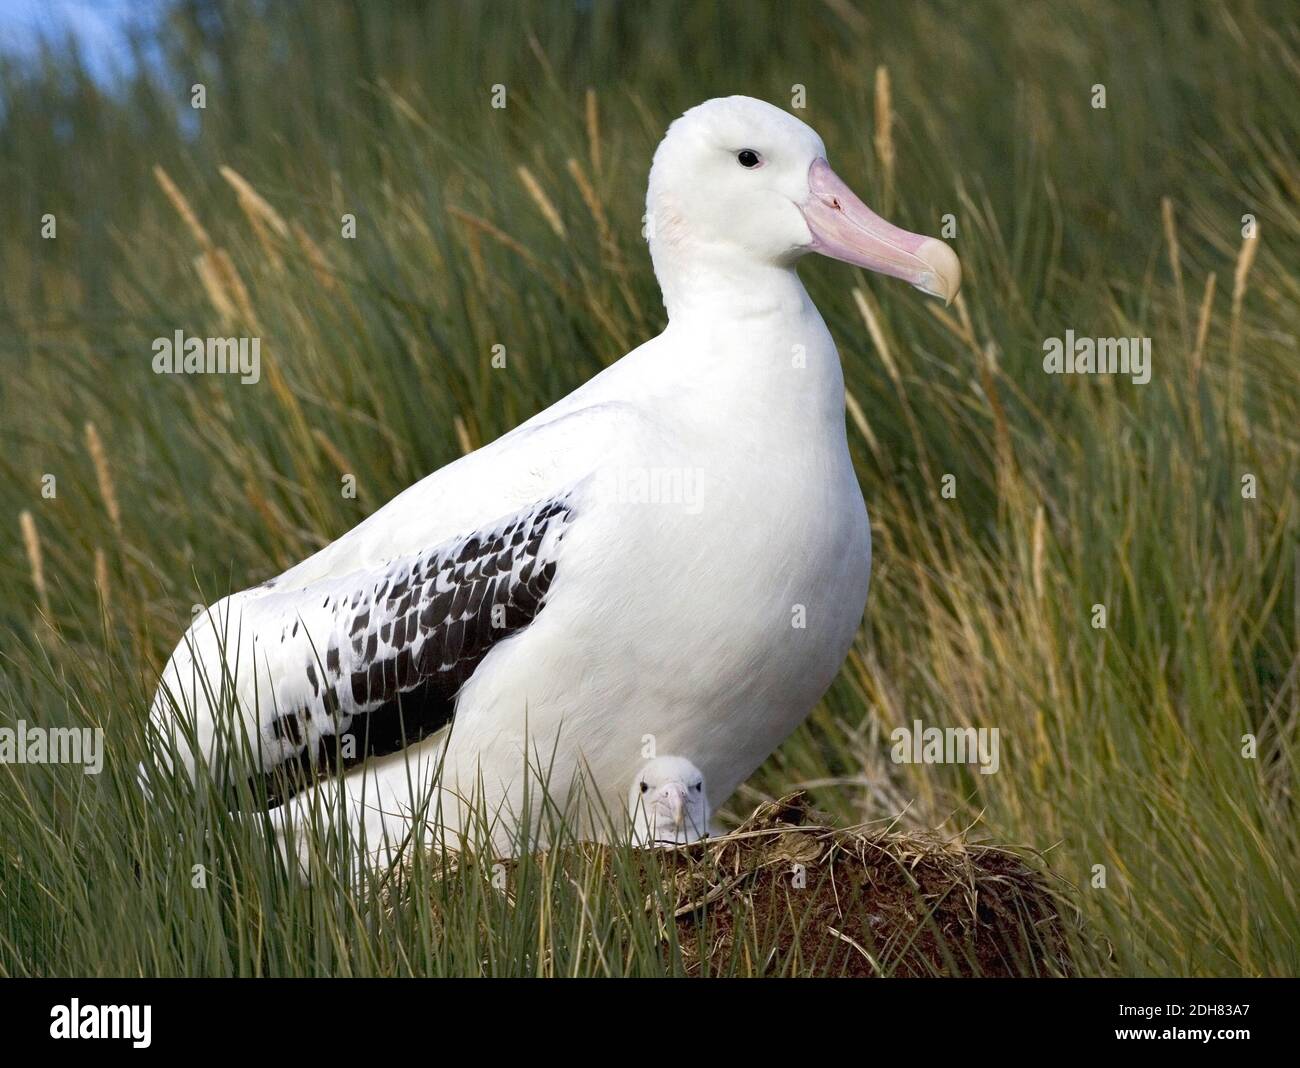 Wandering Albatros, Snowy Albatross (Diomedea exulans), adult with chick in the nest, Suedgeorgien Stock Photo